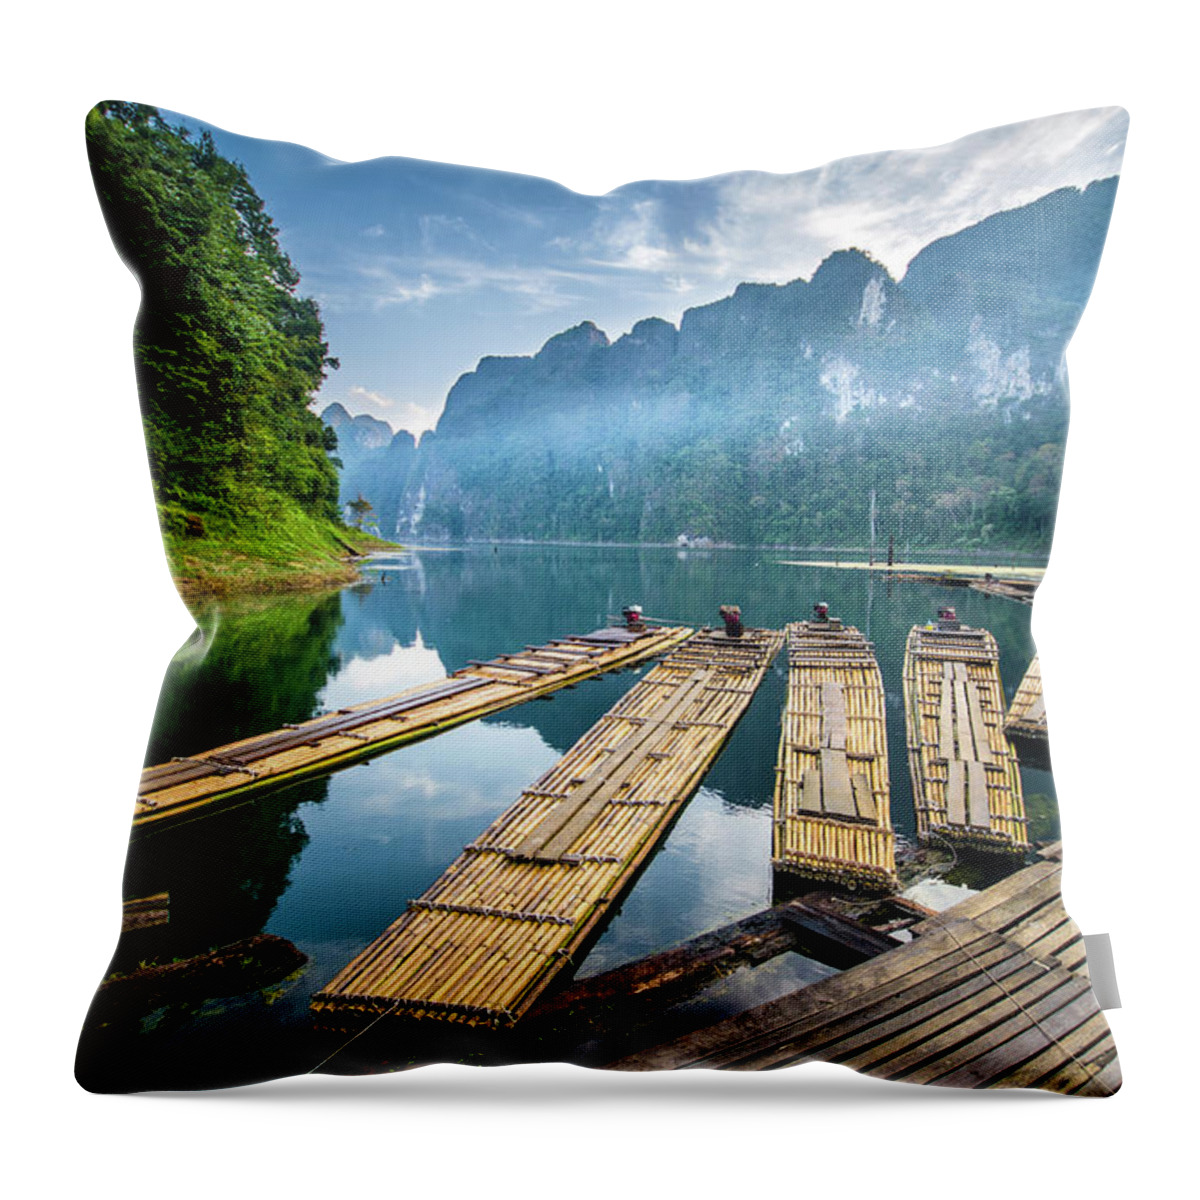 Tranquility Throw Pillow featuring the photograph Khao Sok National Park by Suttipong Sutiratanachai